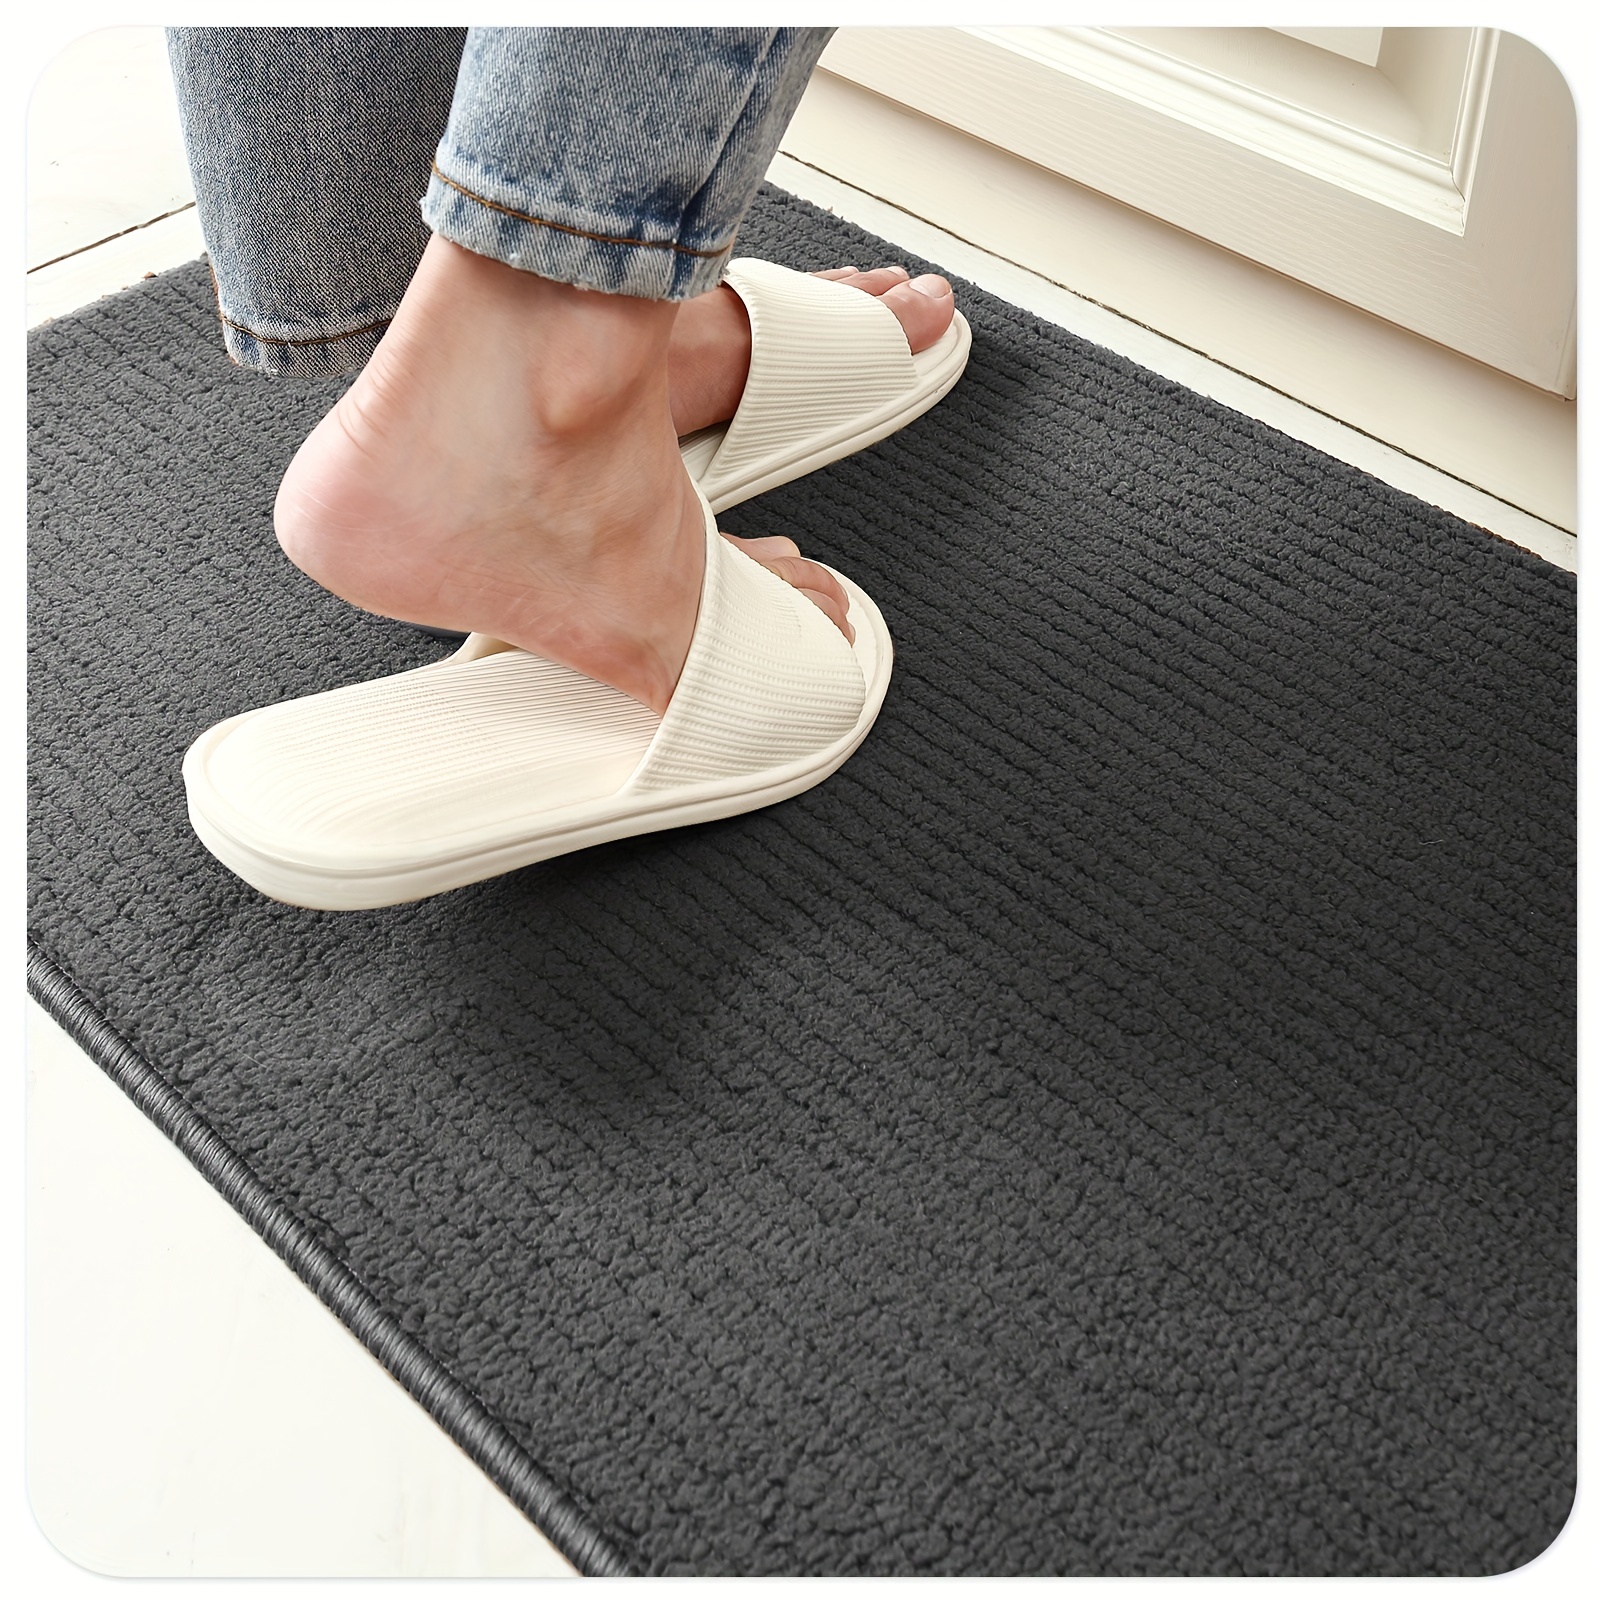 Cognitixx Kitchen Rugs, Non Skid Washable Kitchen Floor Rugs Absorbent  Kitchen Mats with Rubber Backing, Durable Woven Floor Mats for Kitchen,  Home